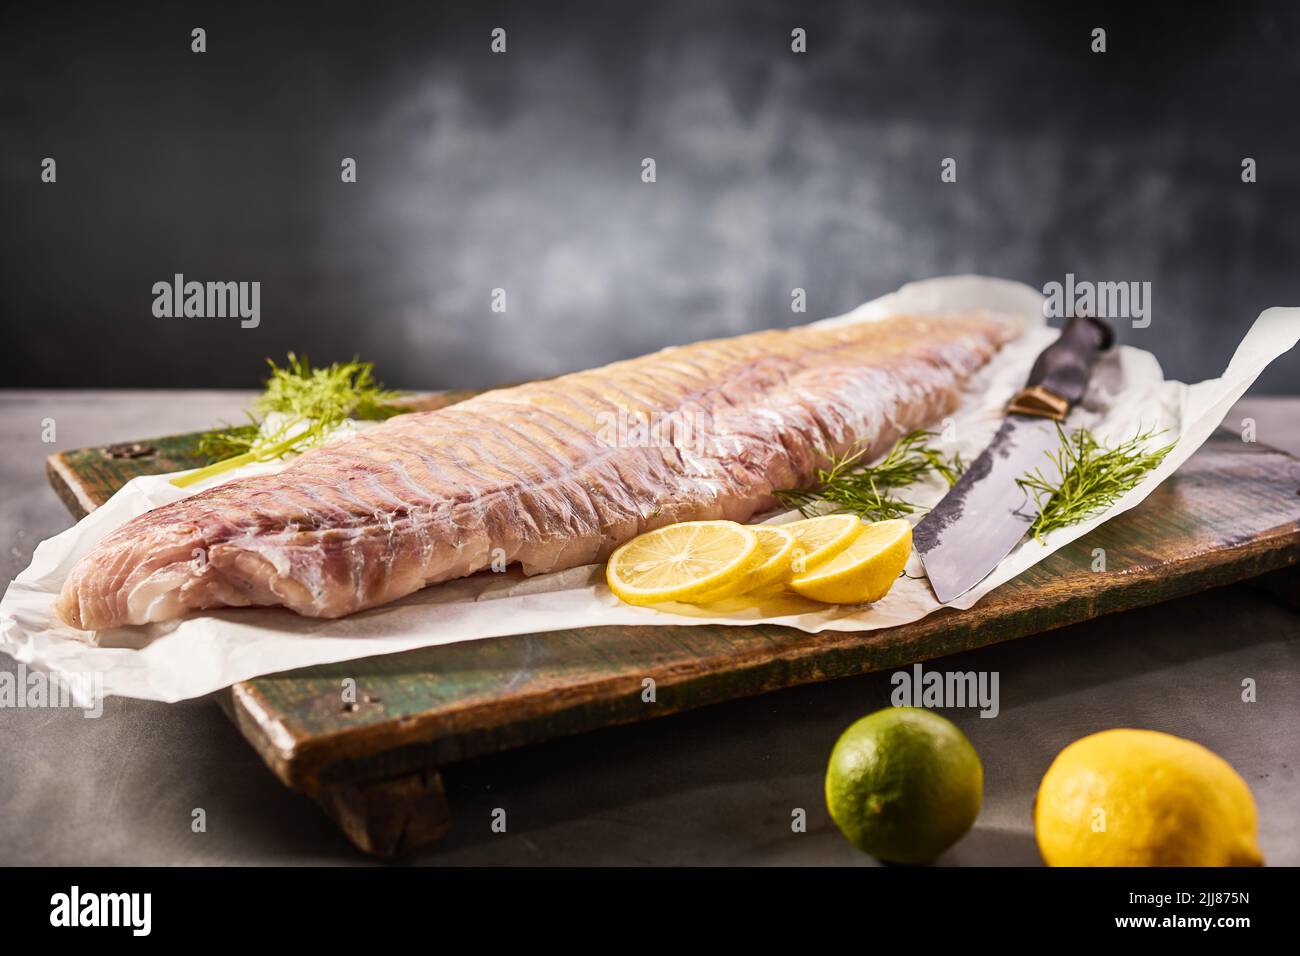 Raw fresh fish fillet with lemon and dill placed on wooden chopping board on table in studio Stock Photo